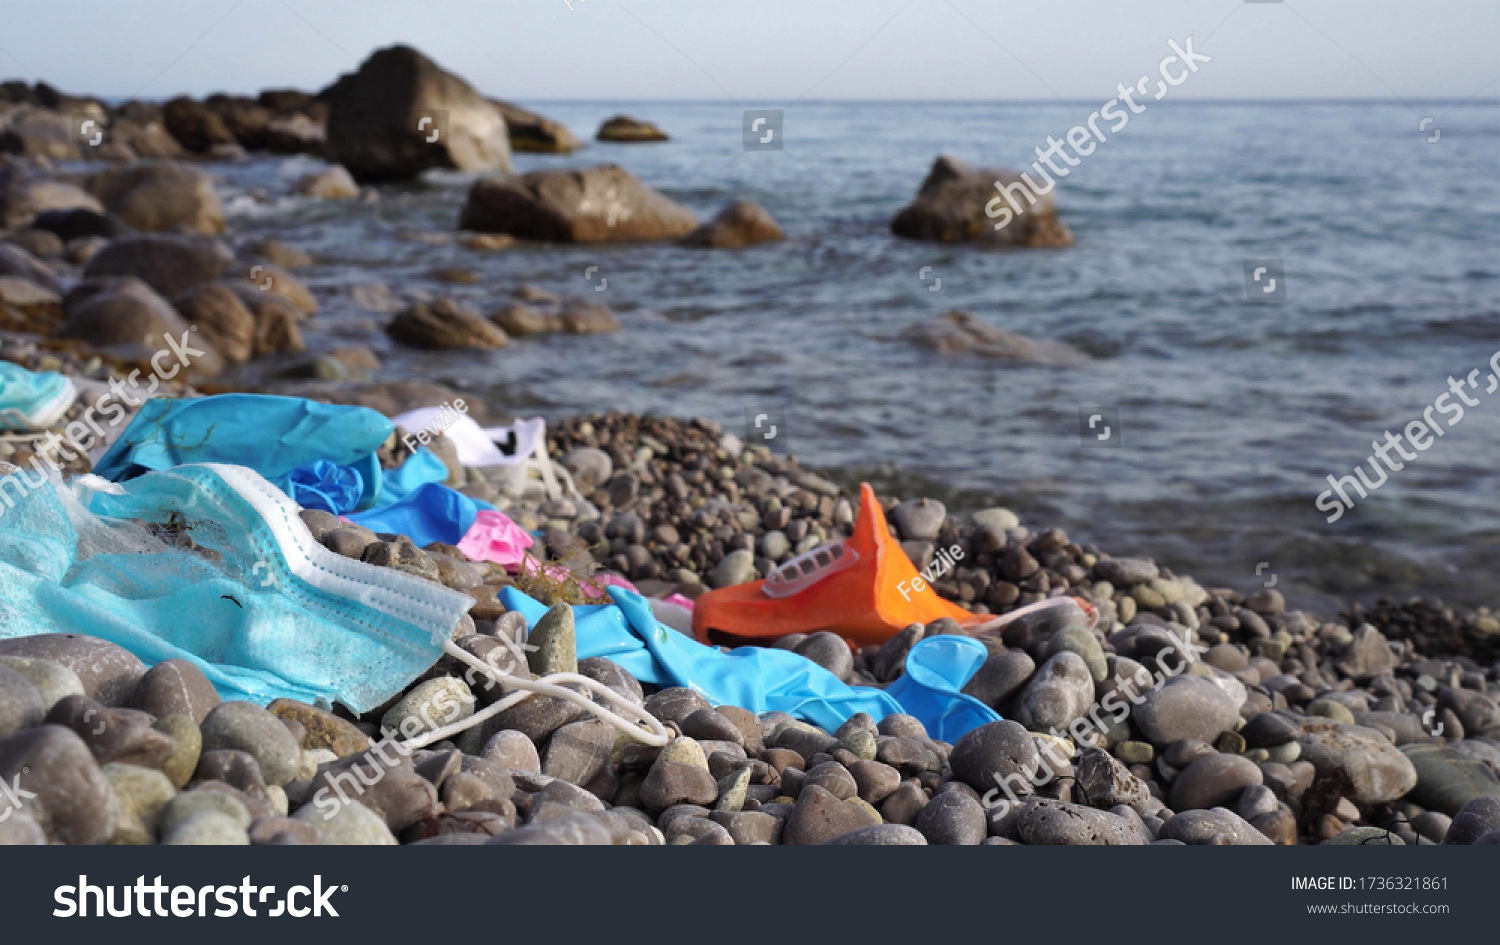 Waste during COVID-19. Discarded to ocean coronavirus single-use face masks and usesd latex gloves. Environmental and ocean plastic pollution #1736321861